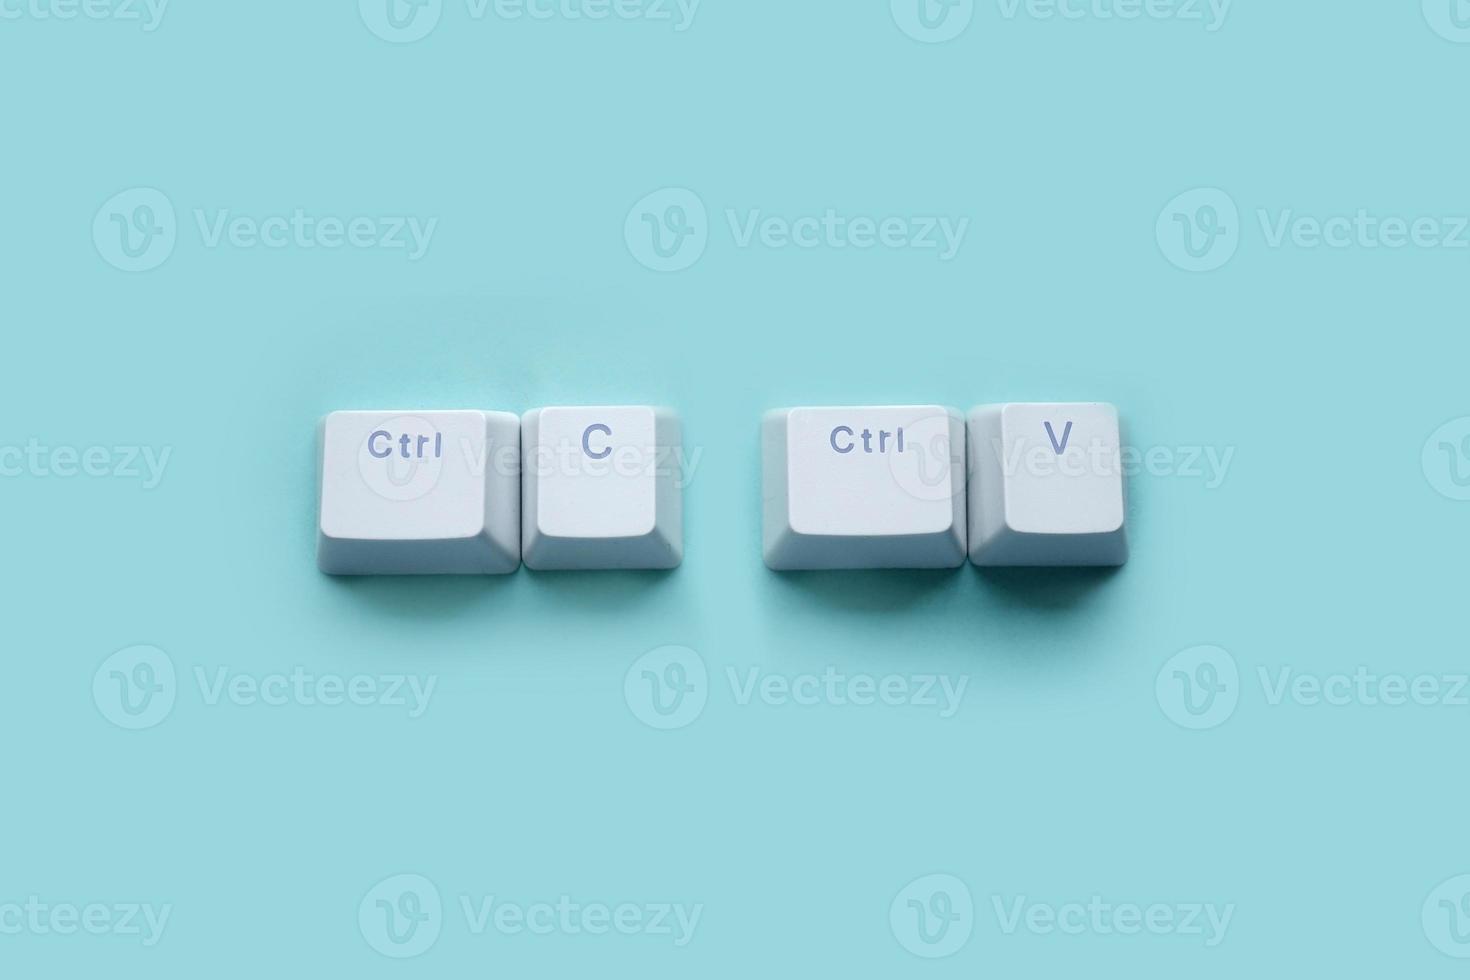 Ctrl C, Ctrl V keyboard buttons, copy and paste key shortcut isolated on a blue background. photo